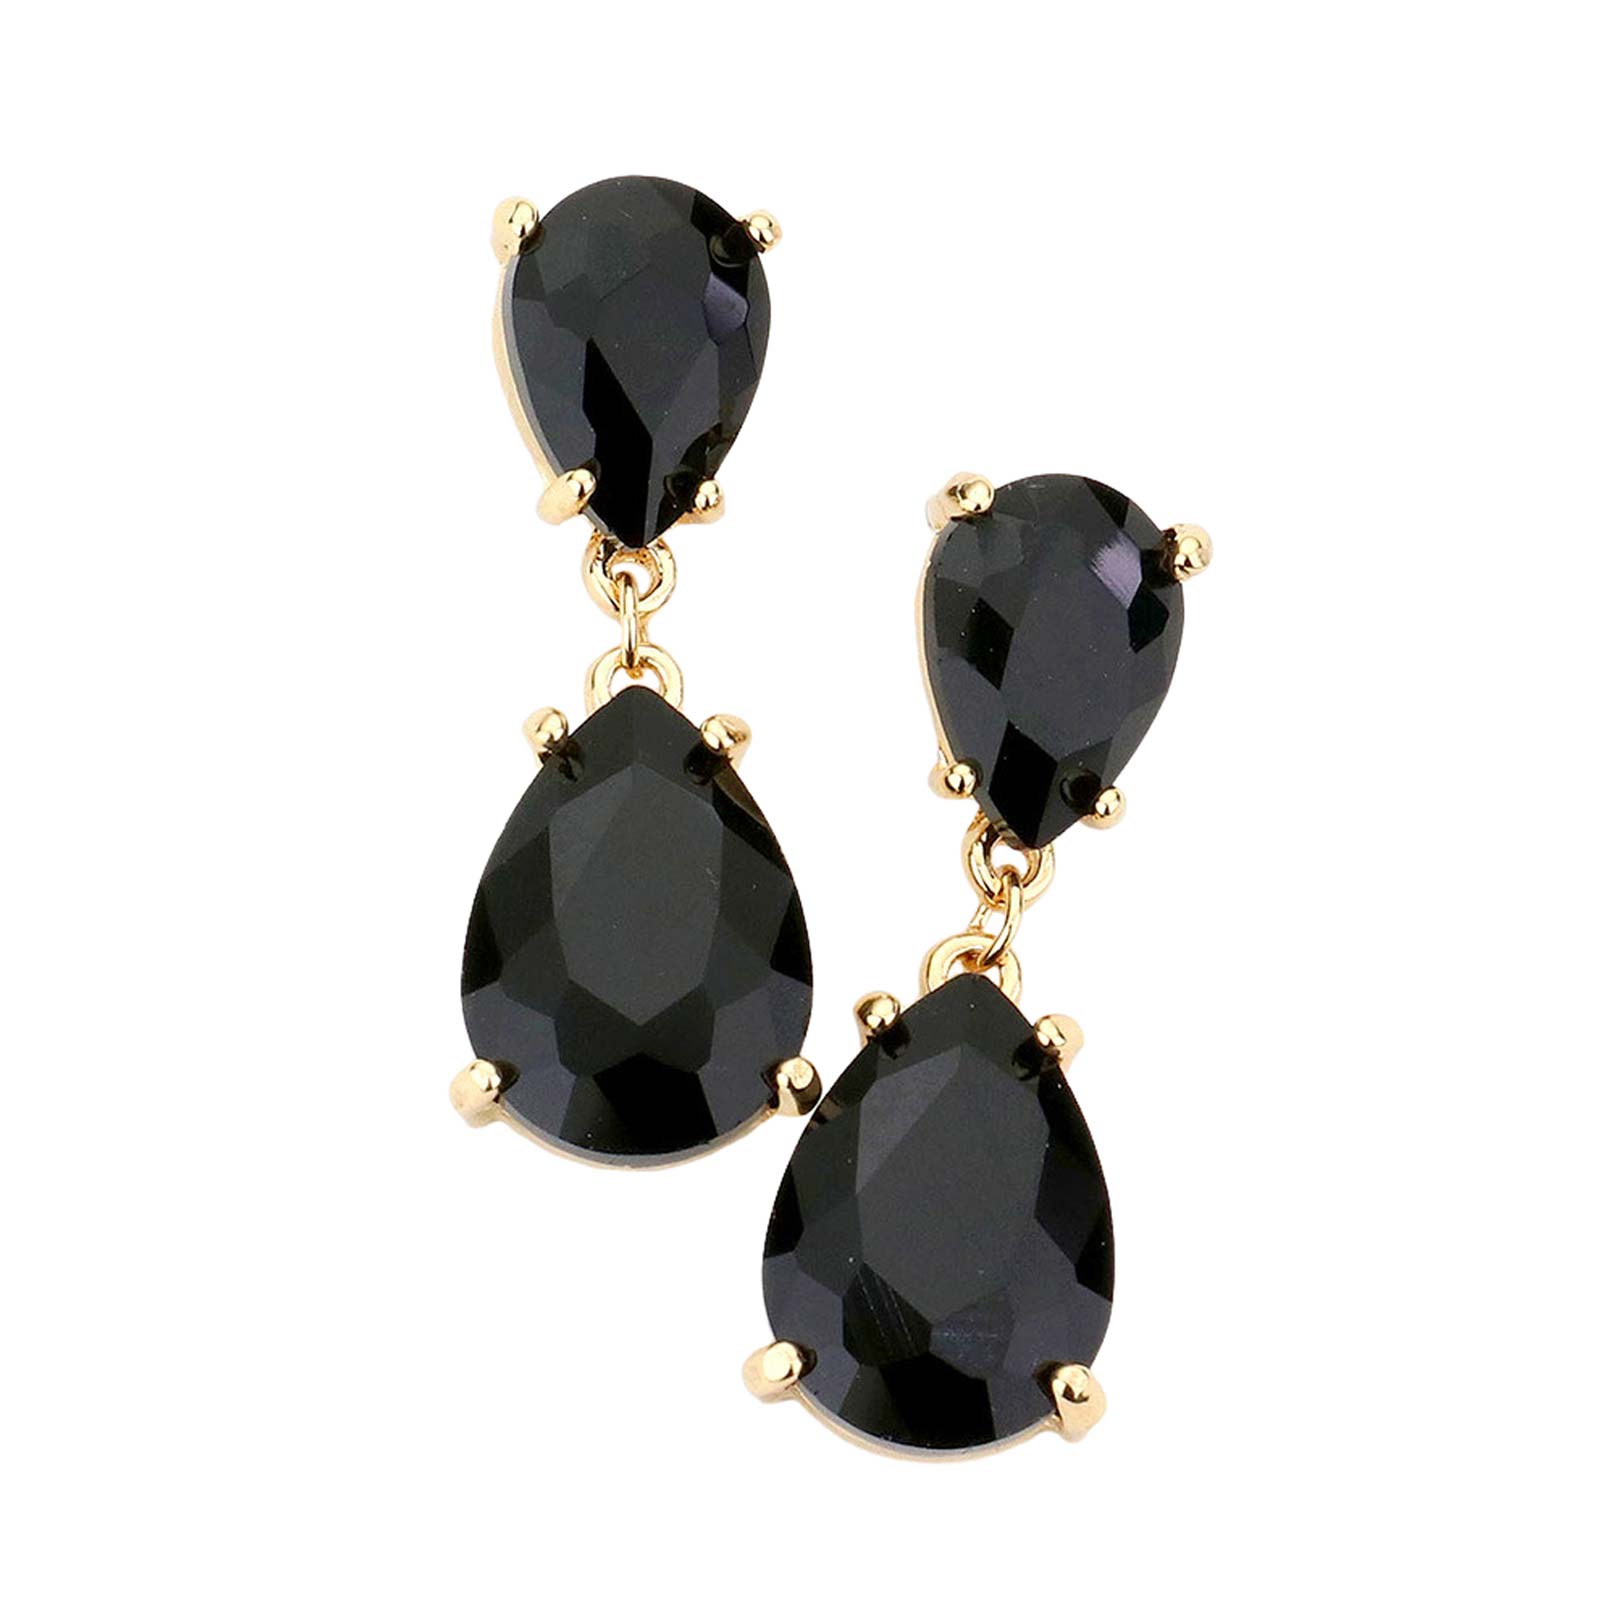 Gold Black Double Teardrop Link Dangle Evening Earrings, Beautiful teardrop-shaped dangle drop earrings. These elegant, comfortable earrings can be worn all day to dress up any outfit. Wear a pop of shine to complete your ensemble with a classy style. The perfect accessory for adding just the right amount of shimmer and a touch of class to special events. Jewelry that fits your lifestyle and makes your moments awesome!